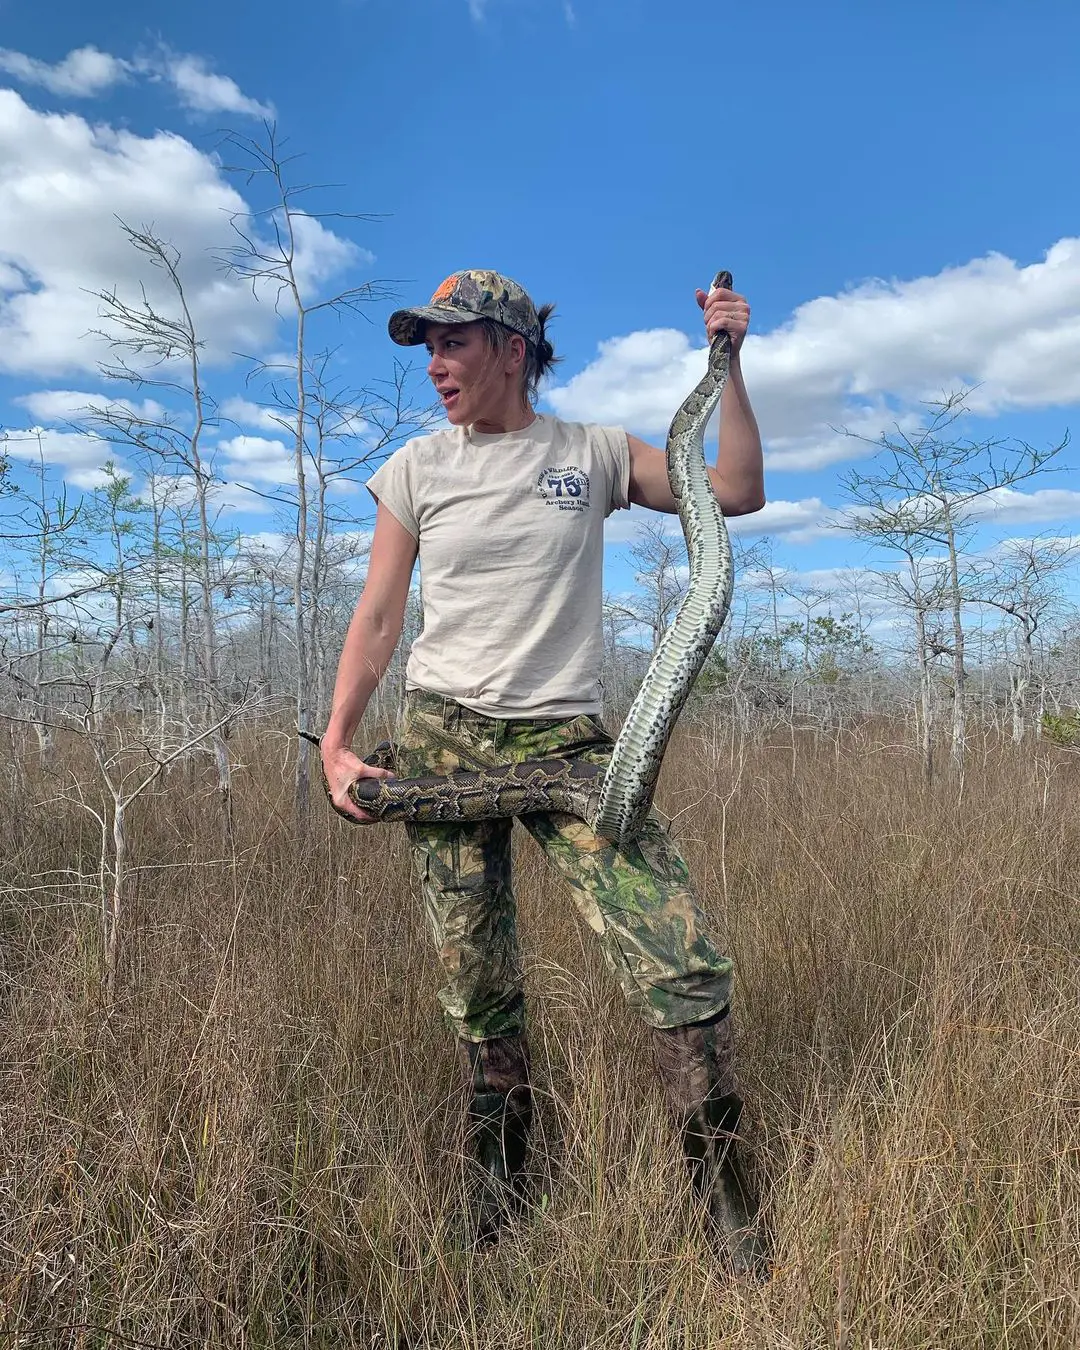 Tess Lee Joins Swamp People New Season On History Channel